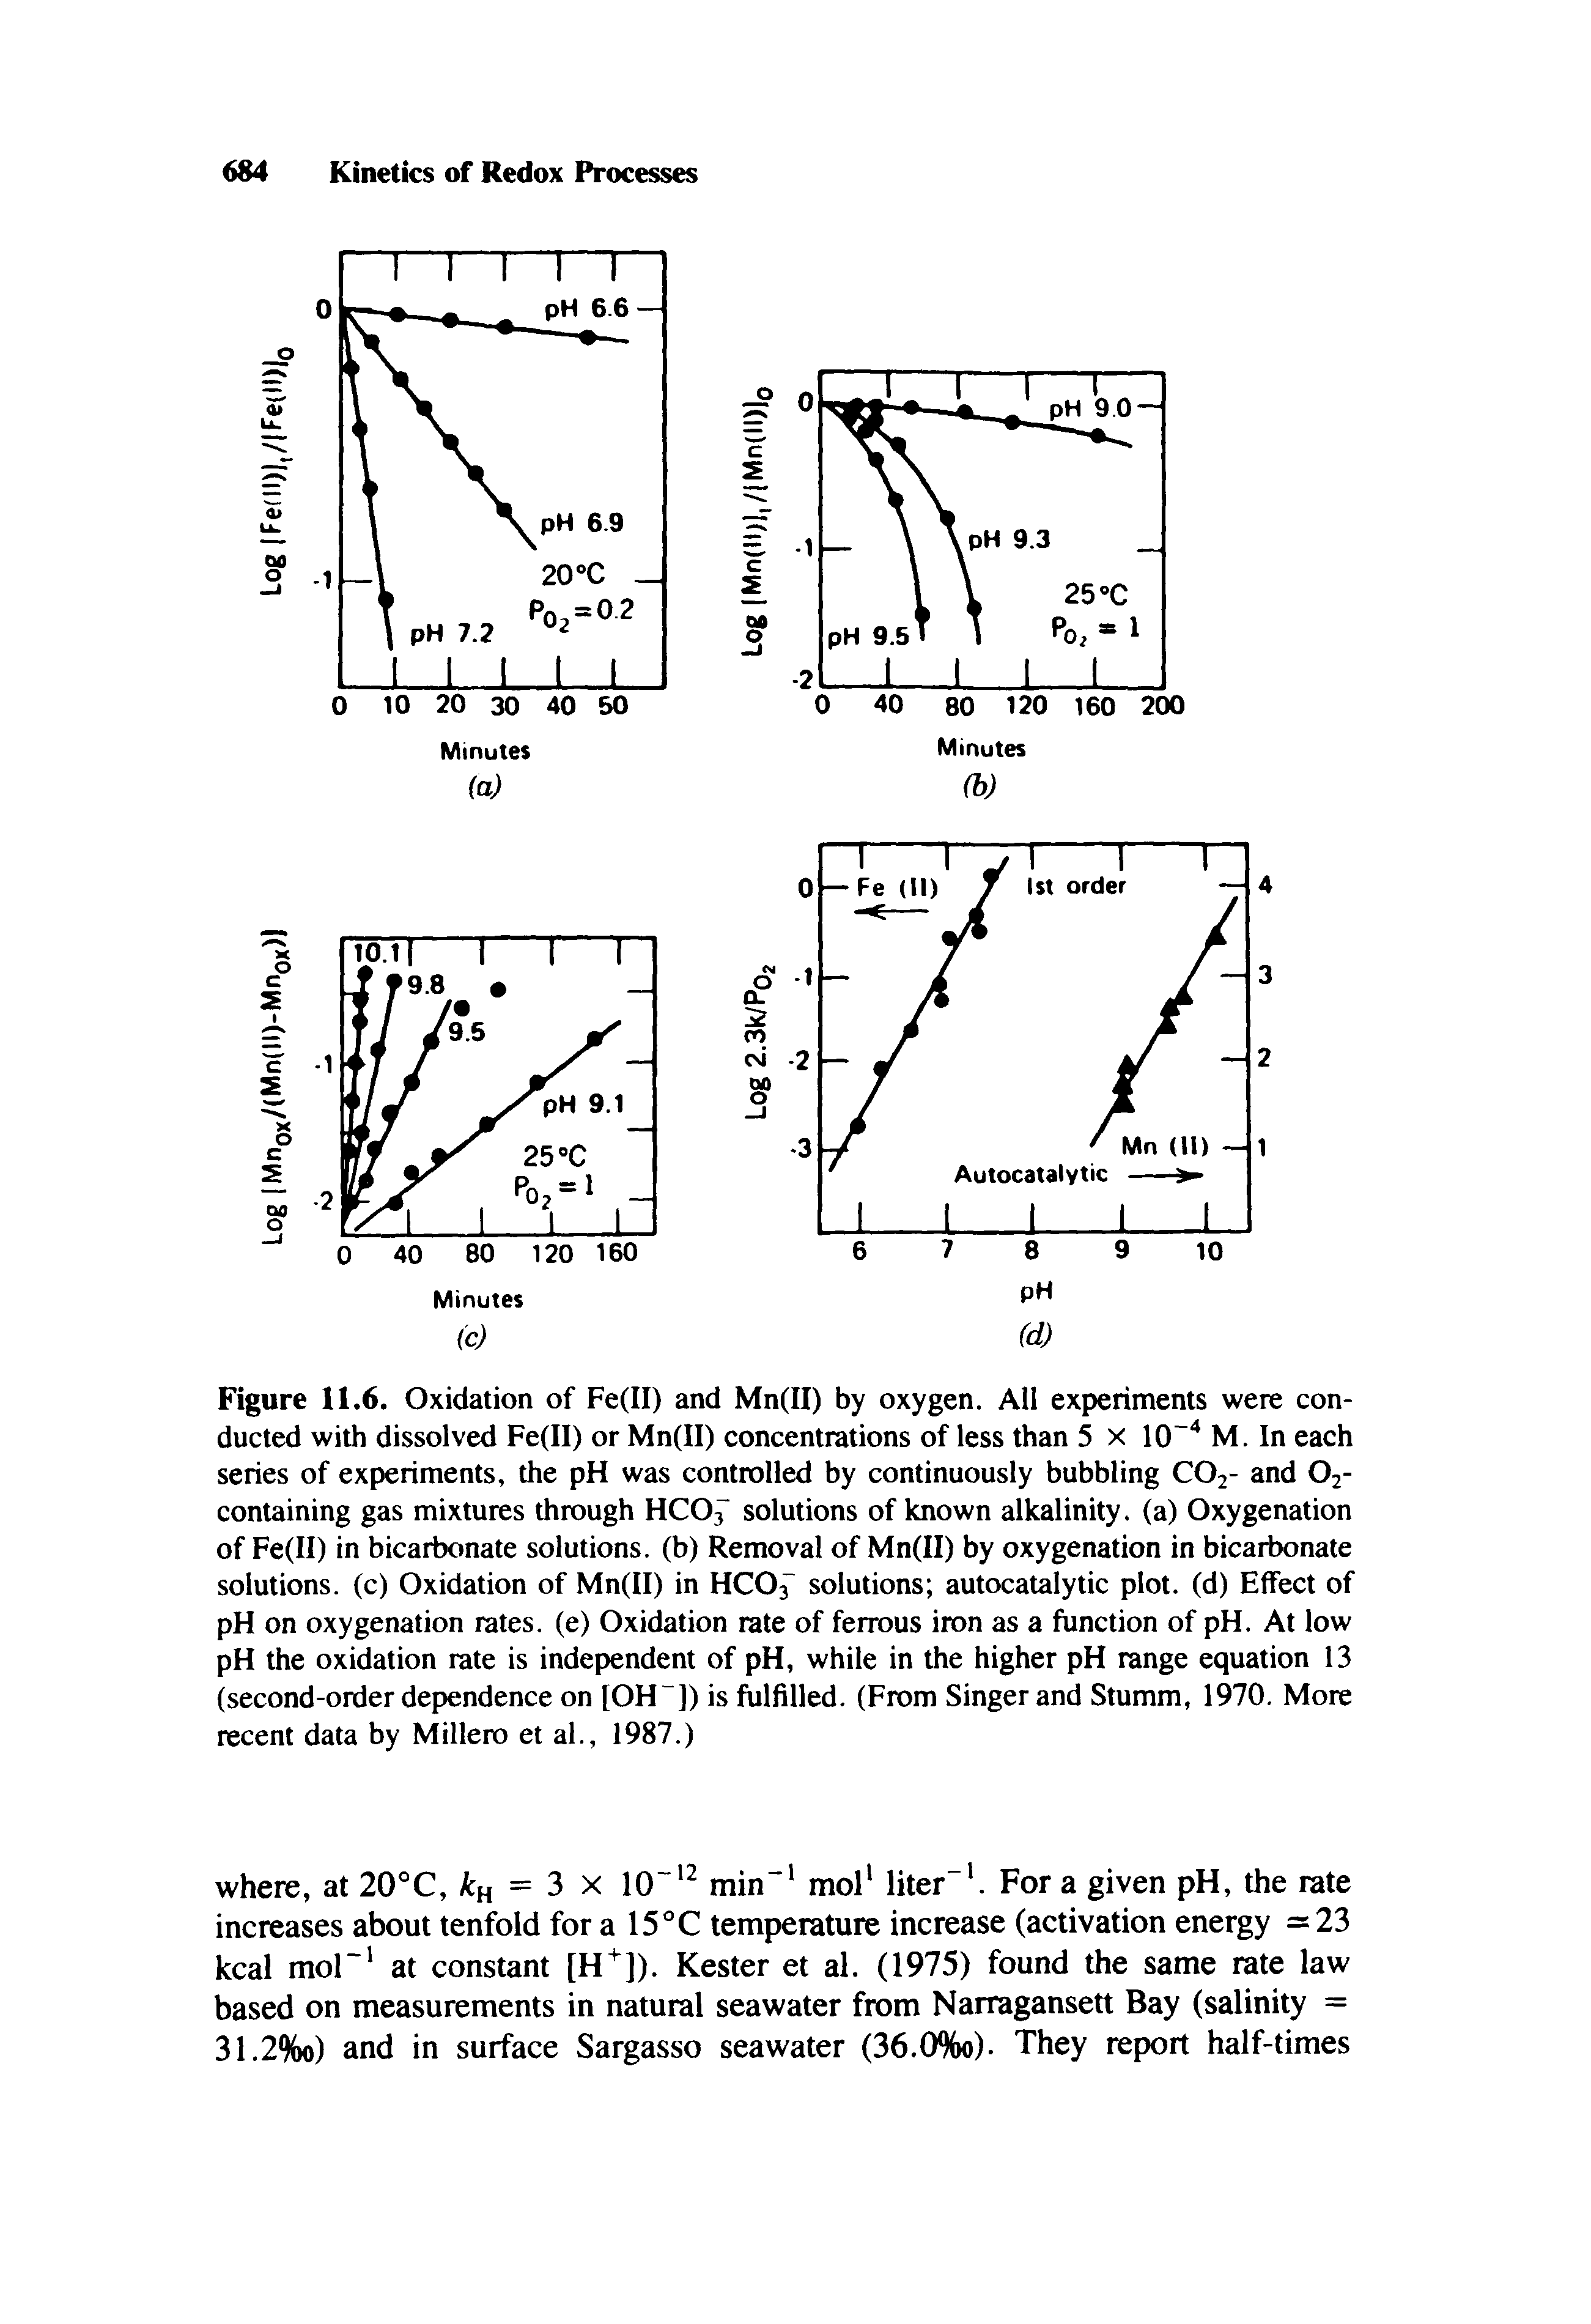 Figure 11.6. Oxidation of Fe(II) and Mn(II) by oxygen. All experiments were conducted with dissolved Fe(II) or Mn(II) concentrations of less than 5 x 10 M. In each series of experiments, the pH was controlled by continuously bubbling CO2- and O2-containing gas mixtures through HCOJ solutions of known alkalinity, (a) Oxygenation of Fe(II) in bicarbonate solutions, (b) Removal of Mn(II) by oxygenation in bicarbonate solutions, (c) Oxidation of Mn(II) in HCOs solutions autocatalytic plot, (d) Effect of pH on oxygenation rates, (e) Oxidation rate of ferrous iron as a function of pH. At low pH the oxidation rate is independent of pH, while in the higher pH range equation 13 (second-order dependence on [OH ]) is fulfilled. (From Singer and Stumm, 1970. More recent data by Millero et al., 1987.)...